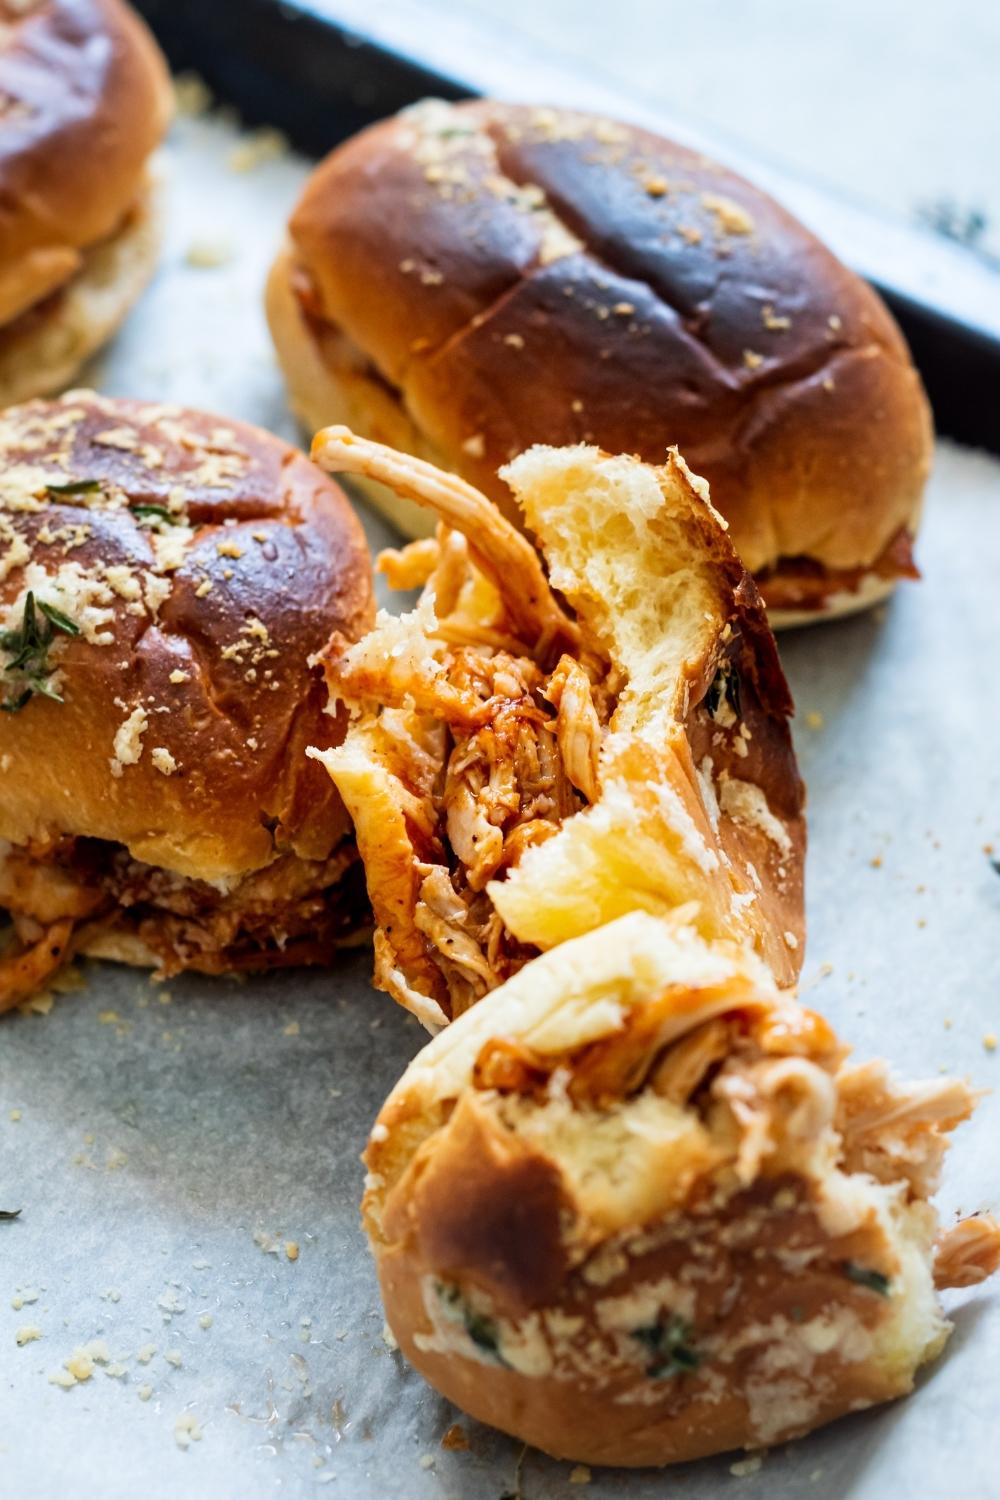 A close-up of BBQ shredded chicken sliders on a parchment lined baking tray. One of the barbecue chicken sliders is cut in half to reveal the chicken between the bread.